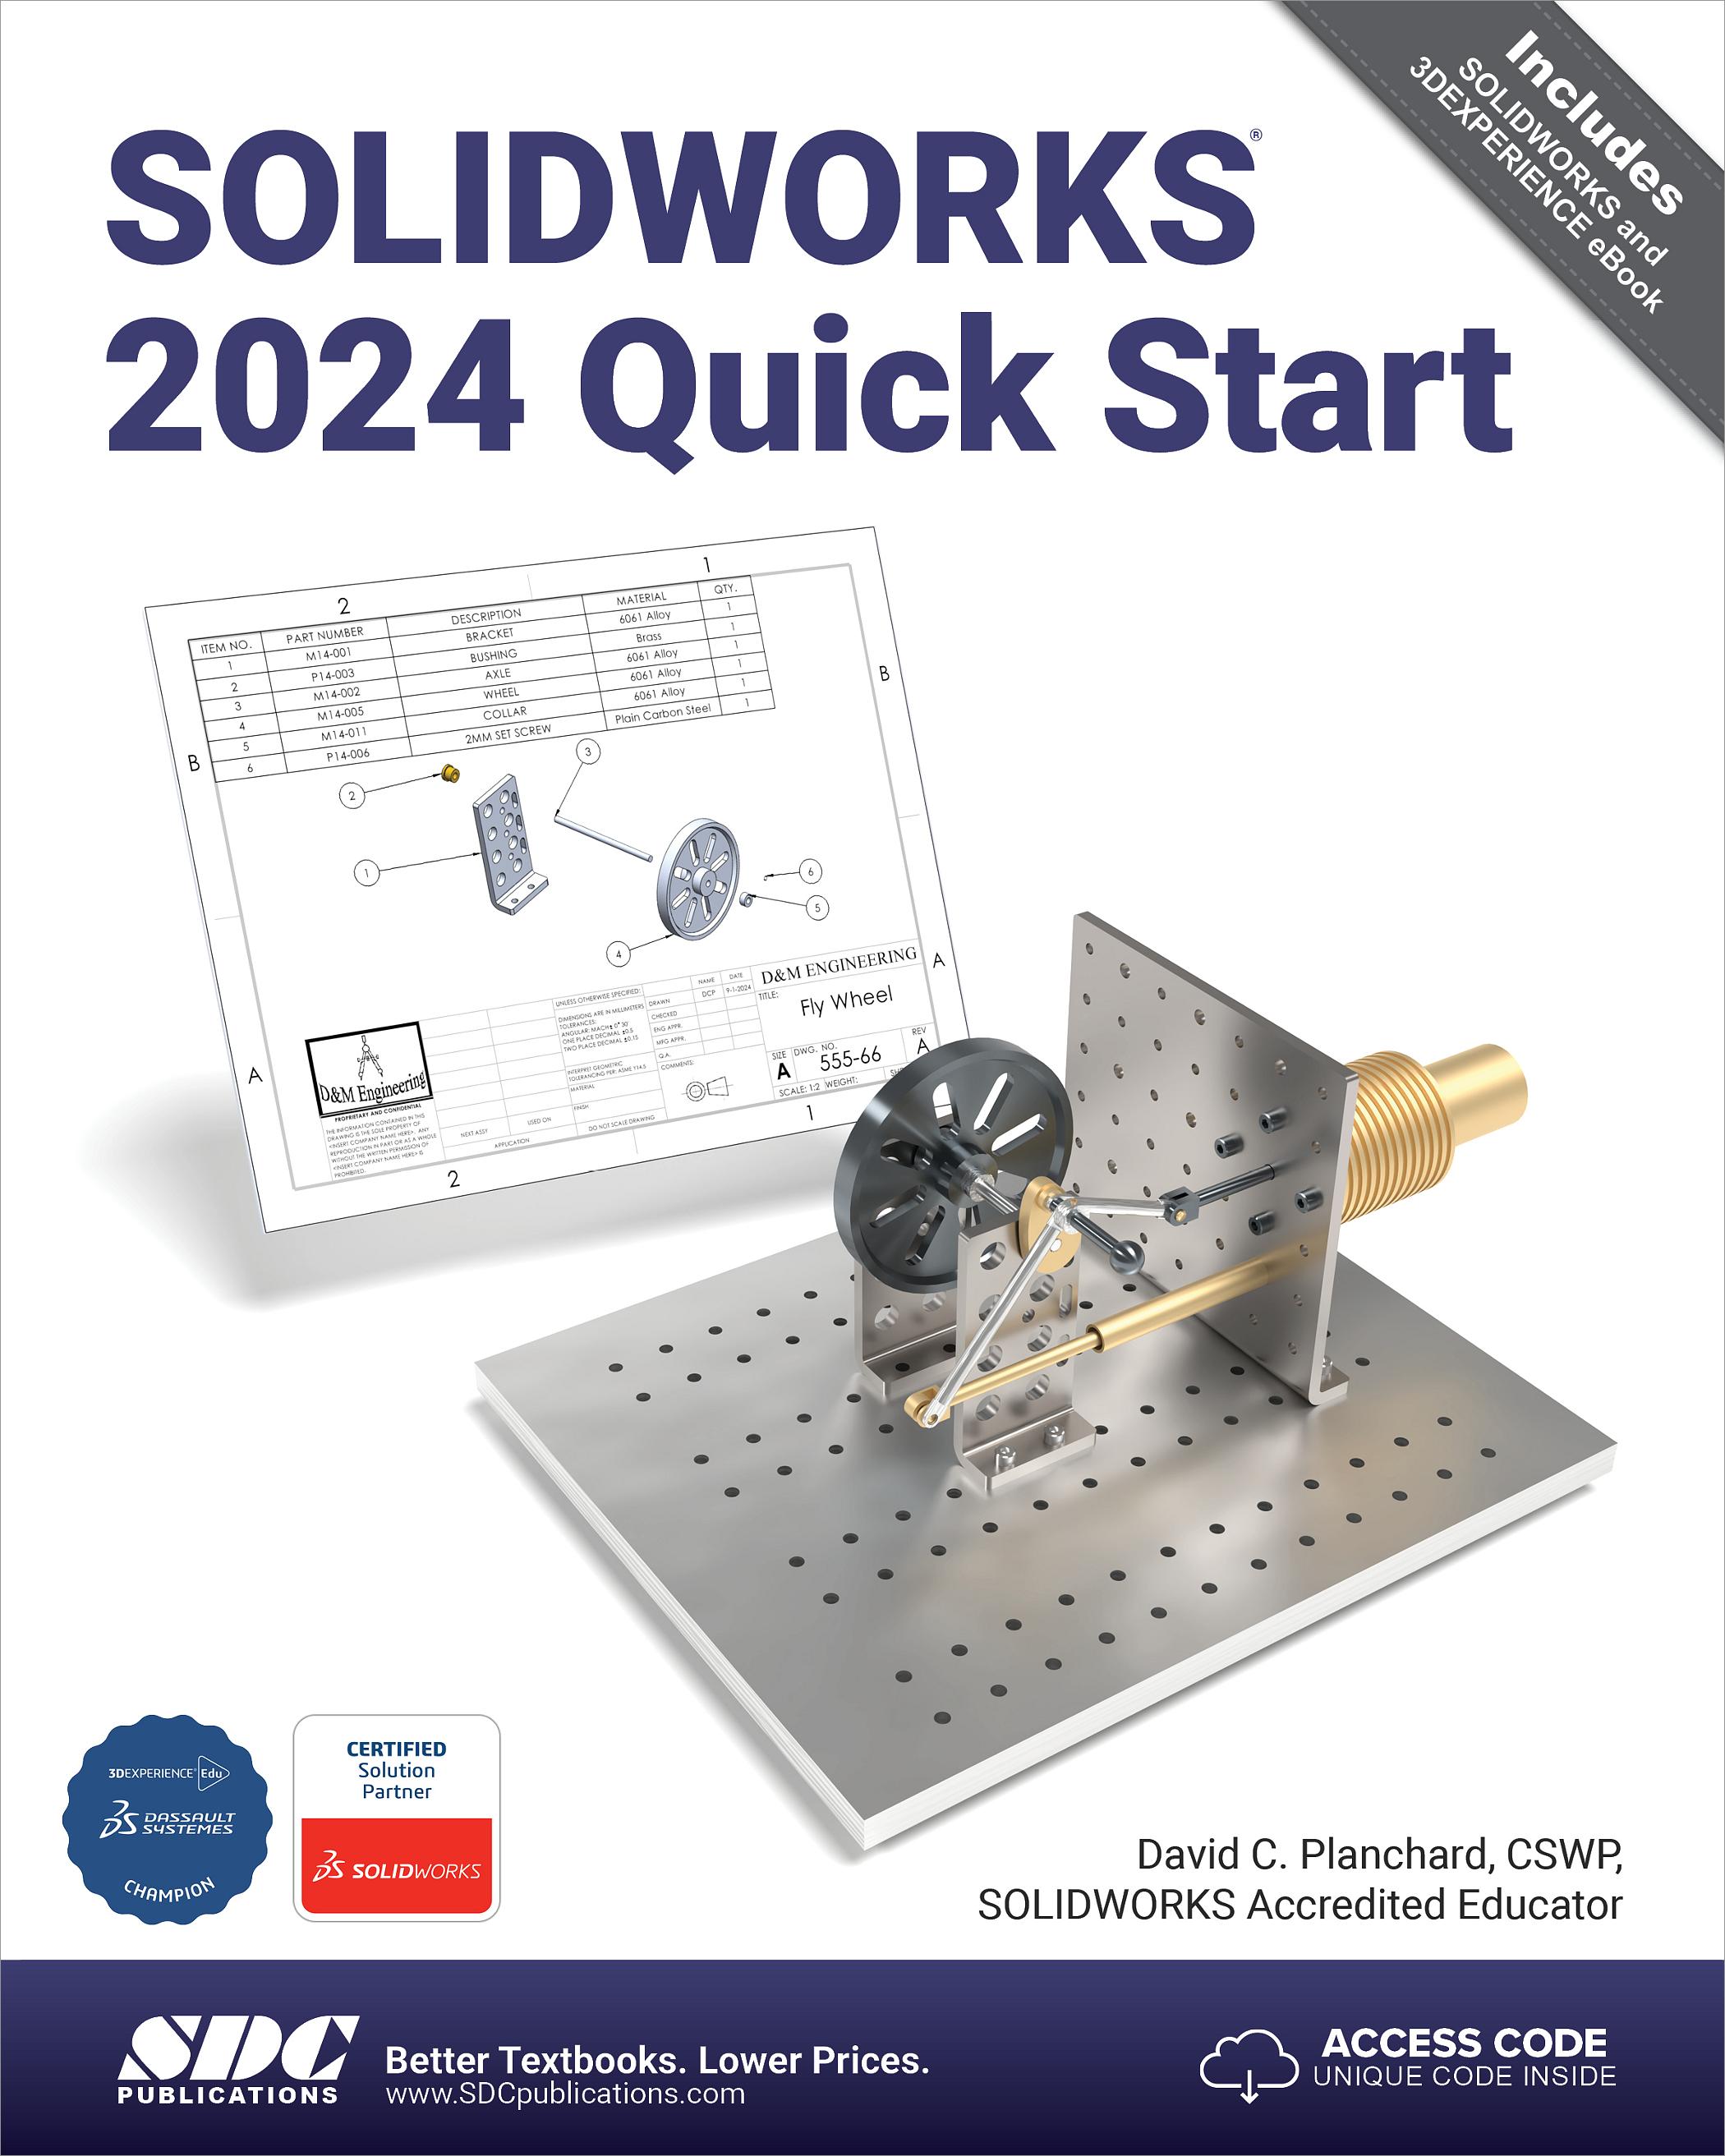 SOLIDWORKS 2024 Quick Start, Book 9781630576370 SDC Publications